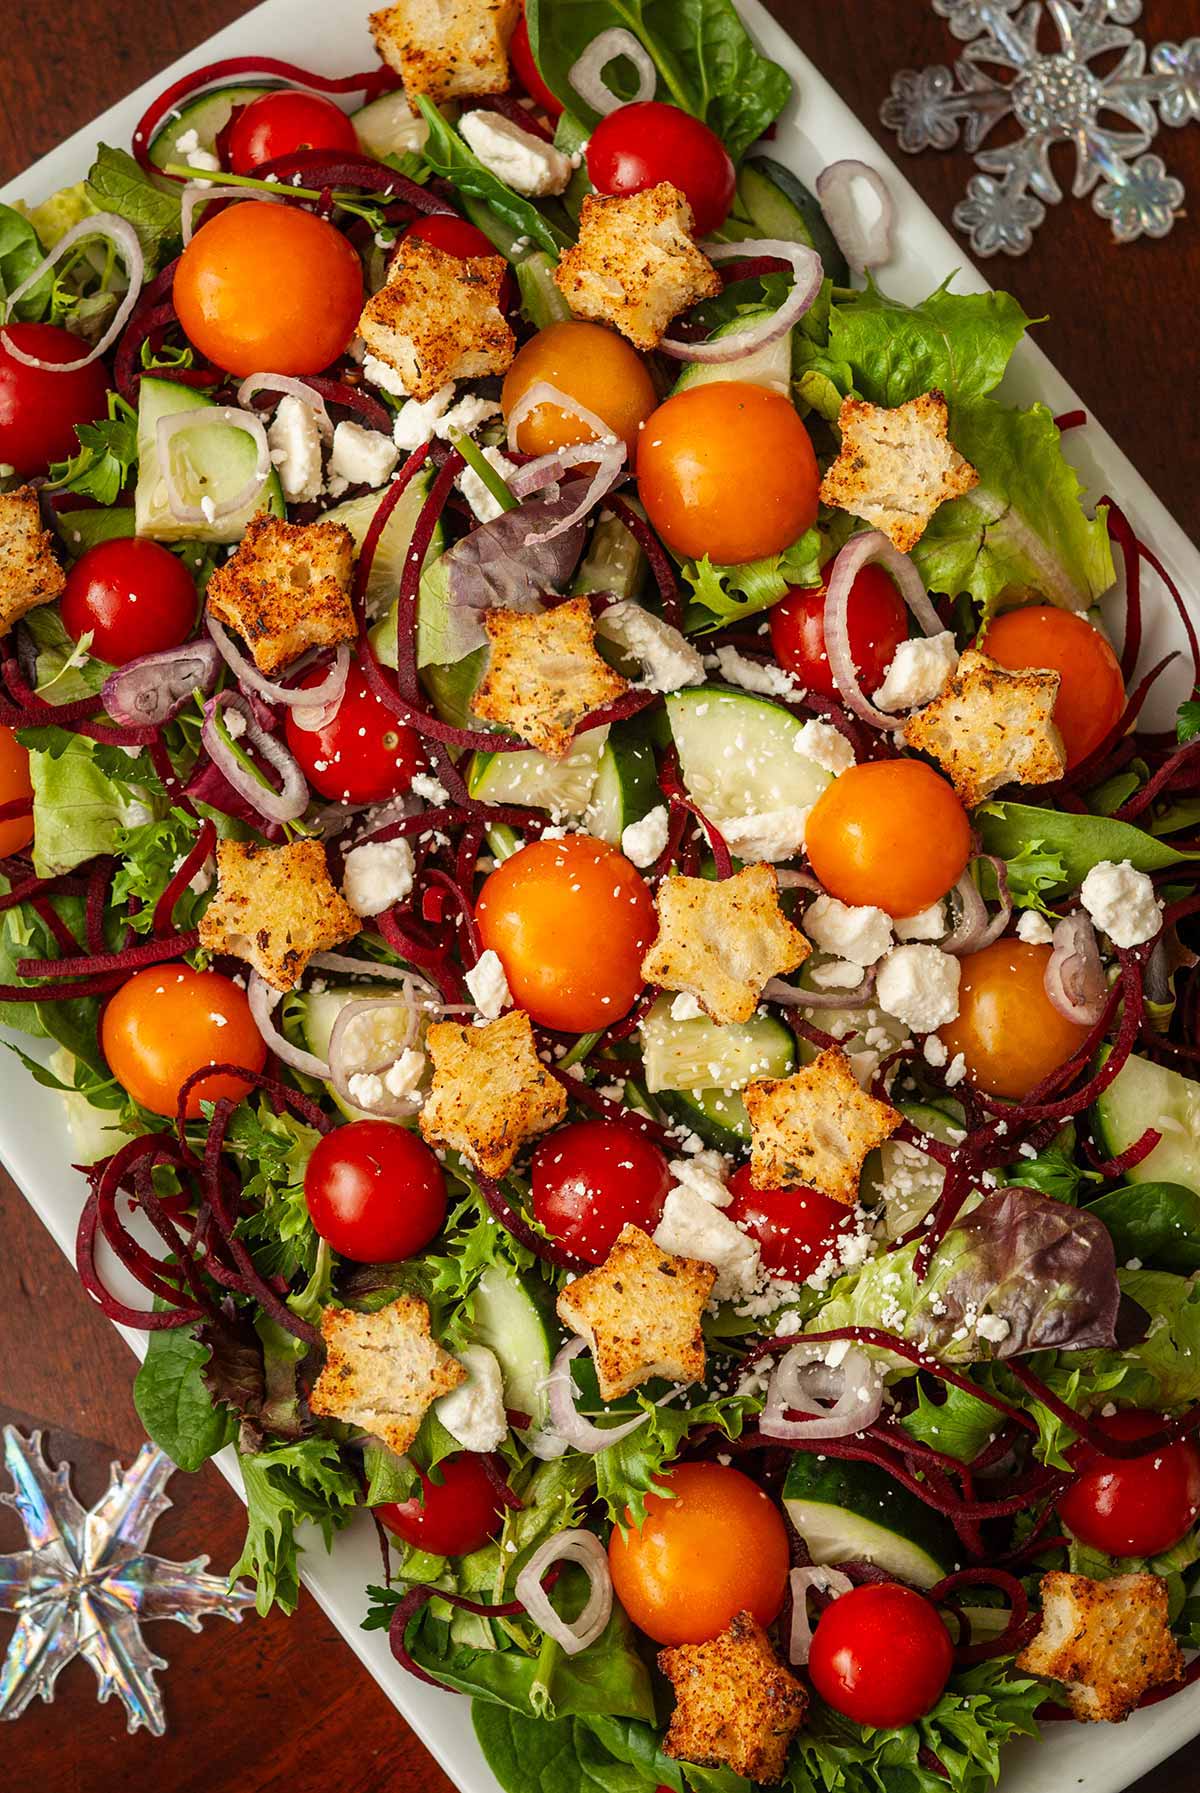 A festive salad with star-shaped croutons and snowflake ornaments in the corners.